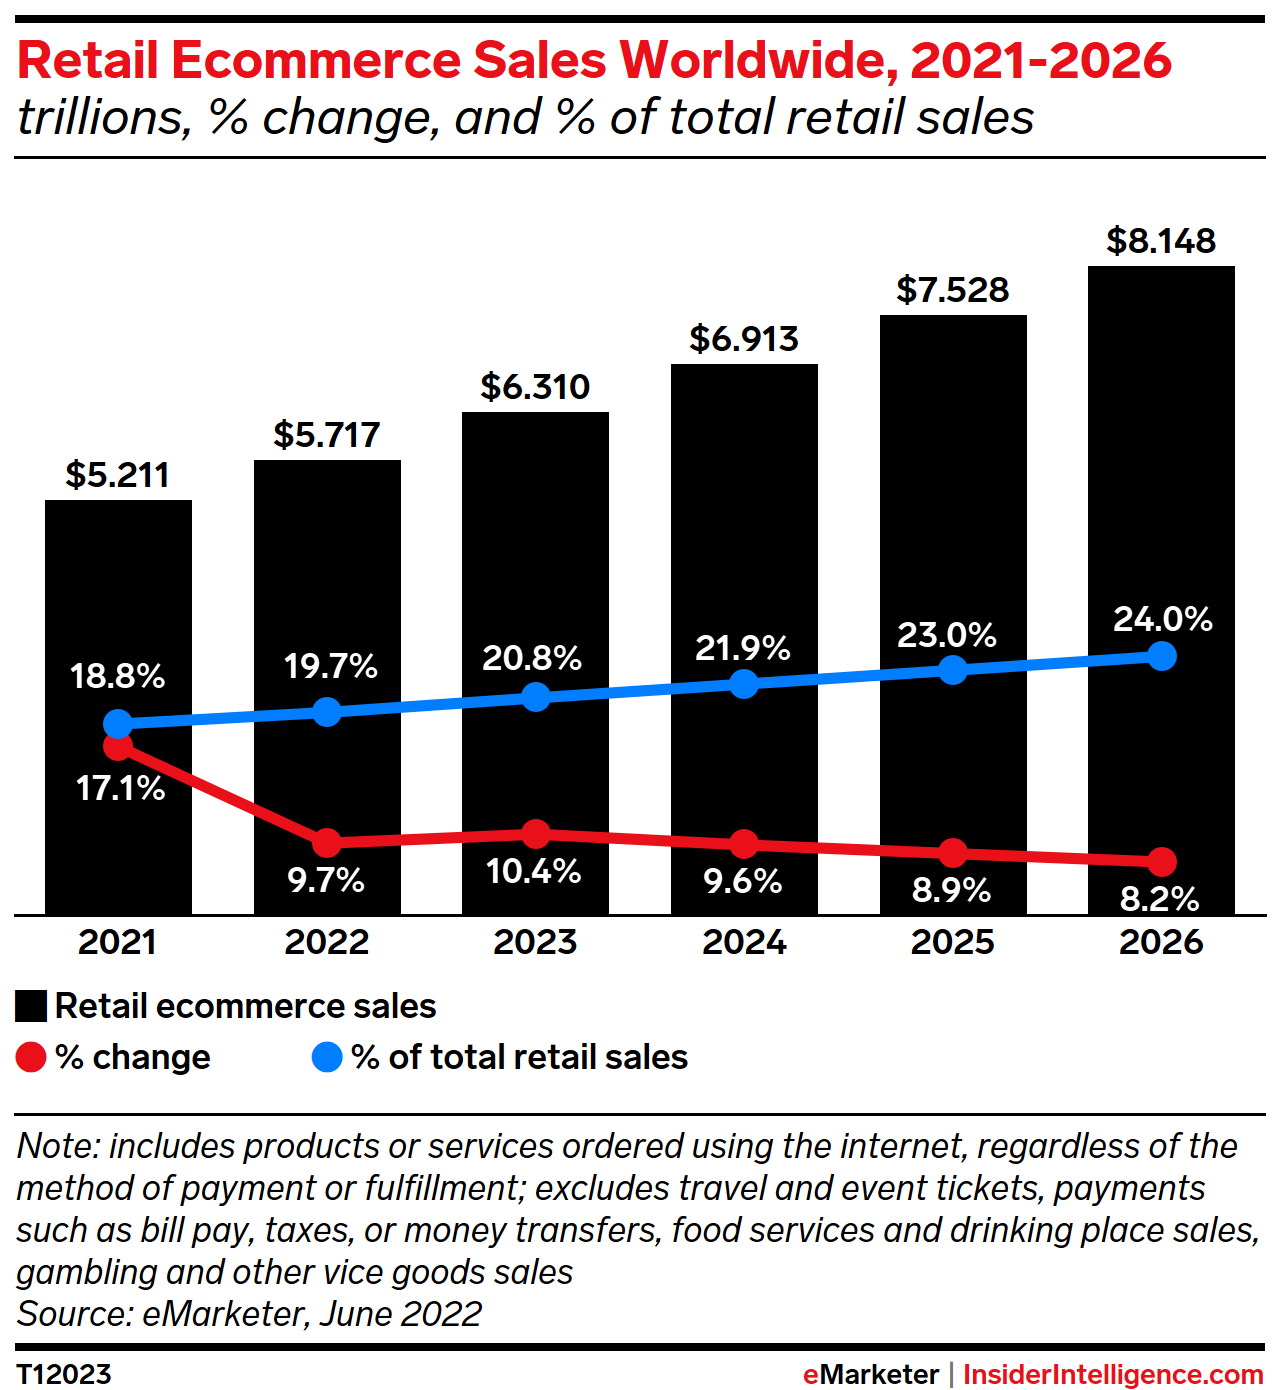 Retail Ecommerce Sales Worldwide, 2021-2026 (trillions, % change, and % of total retail sales)